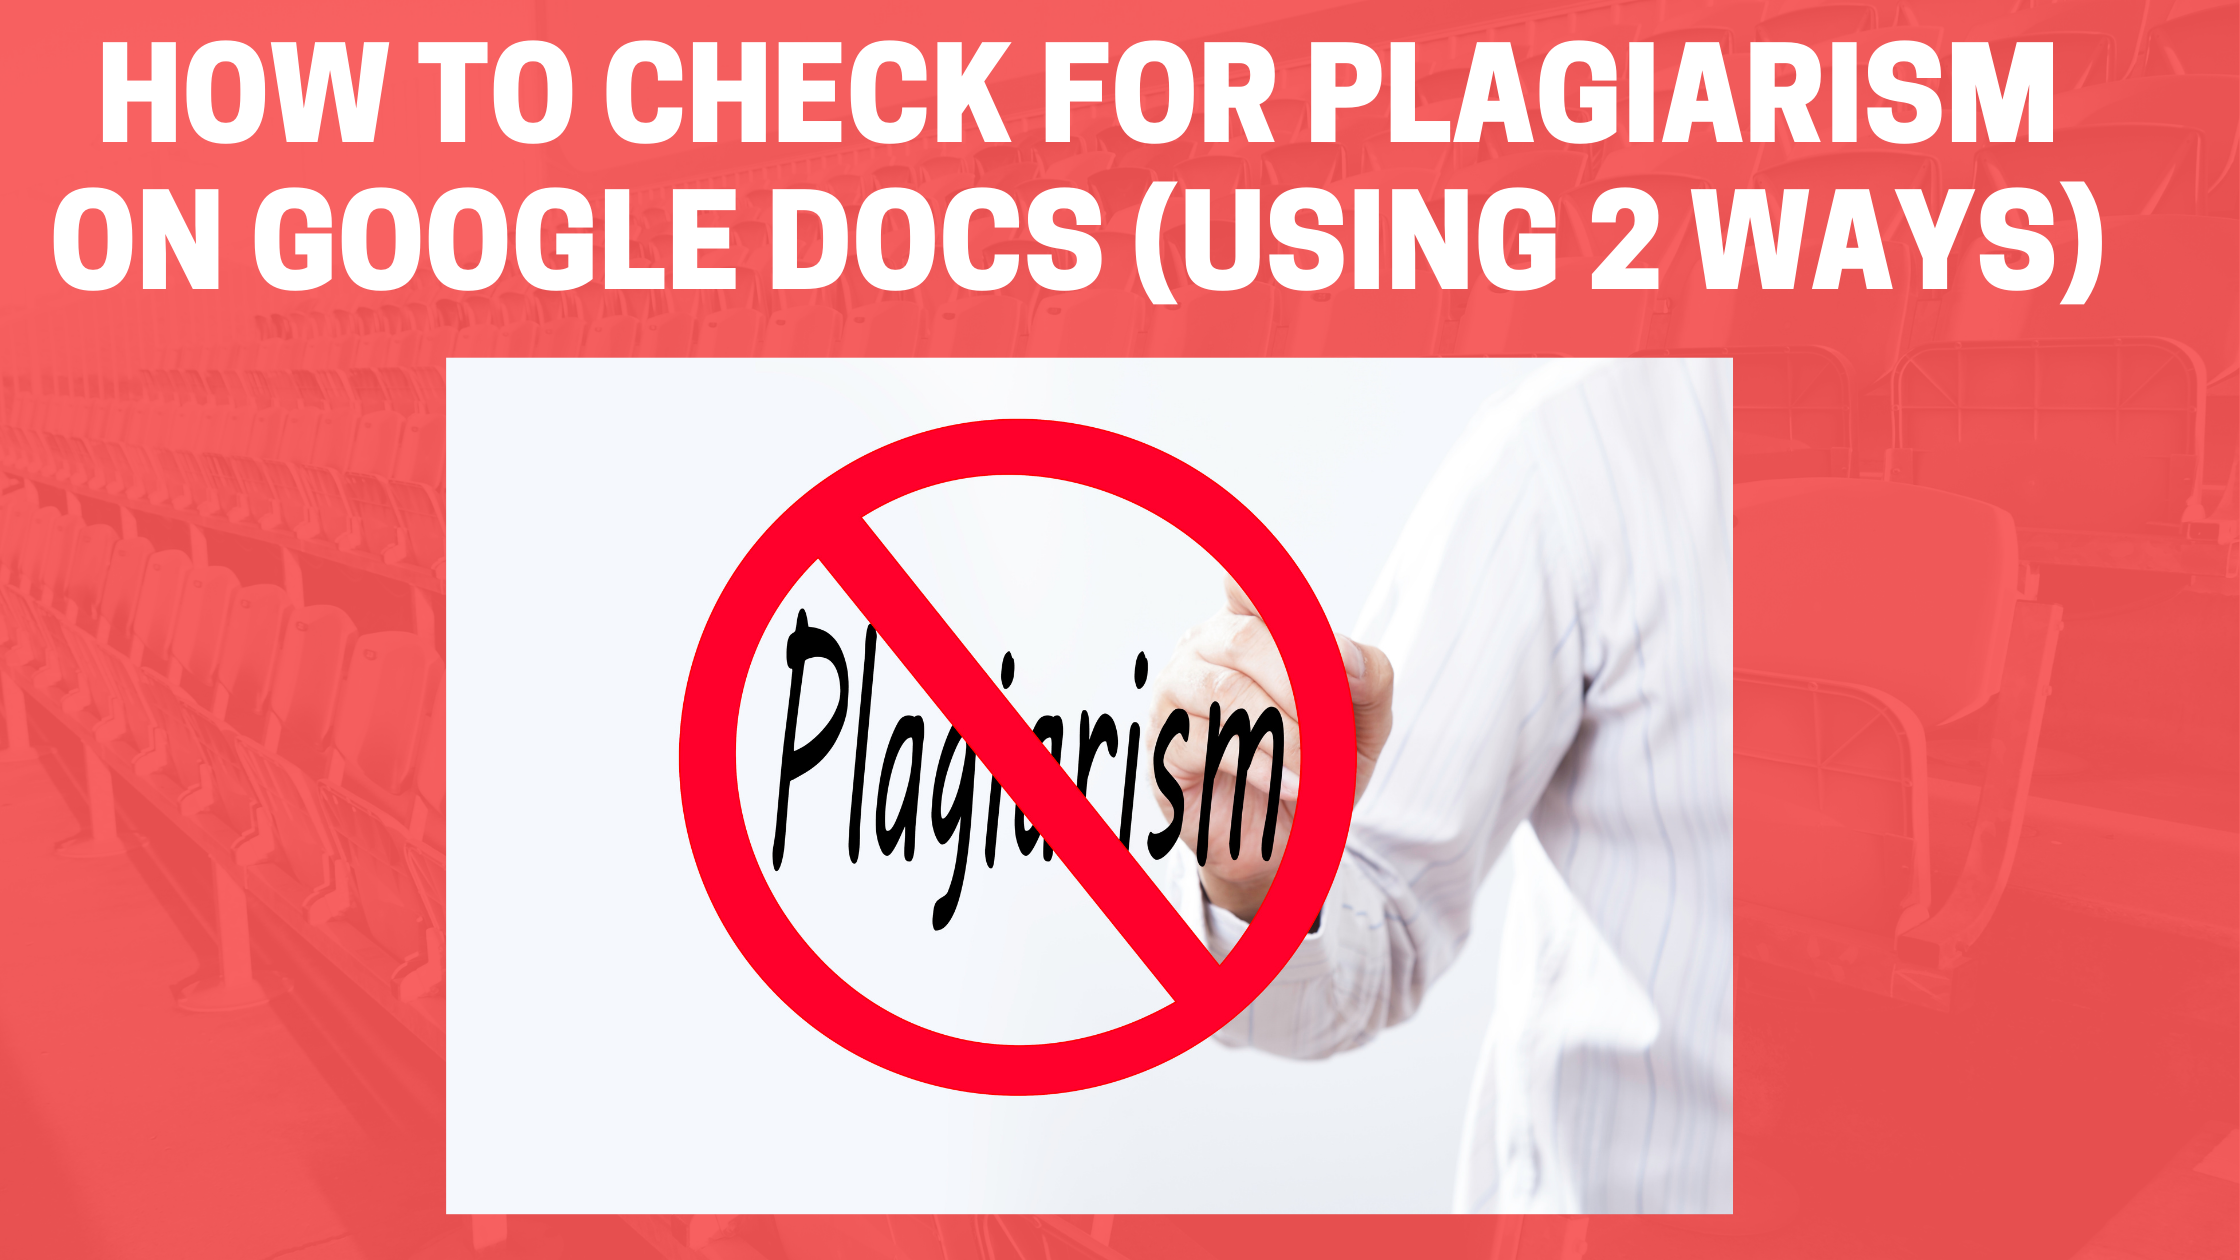 How To Check For Plagiarism On Google Docs